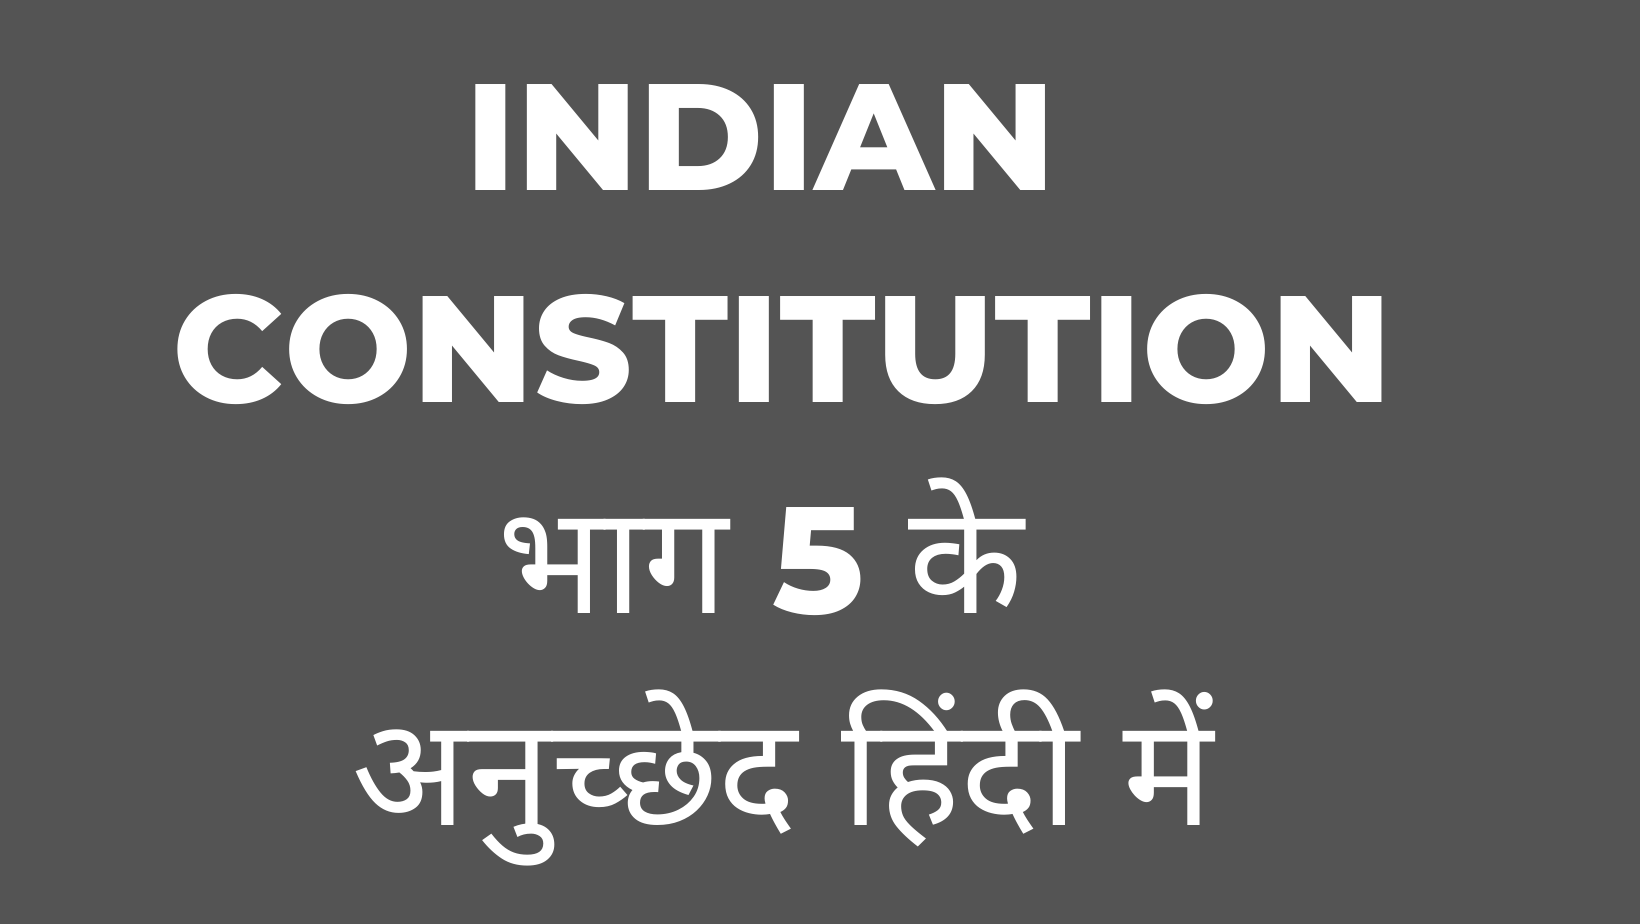 INDIAN CONSTITUTION PART 5 ARTICLE